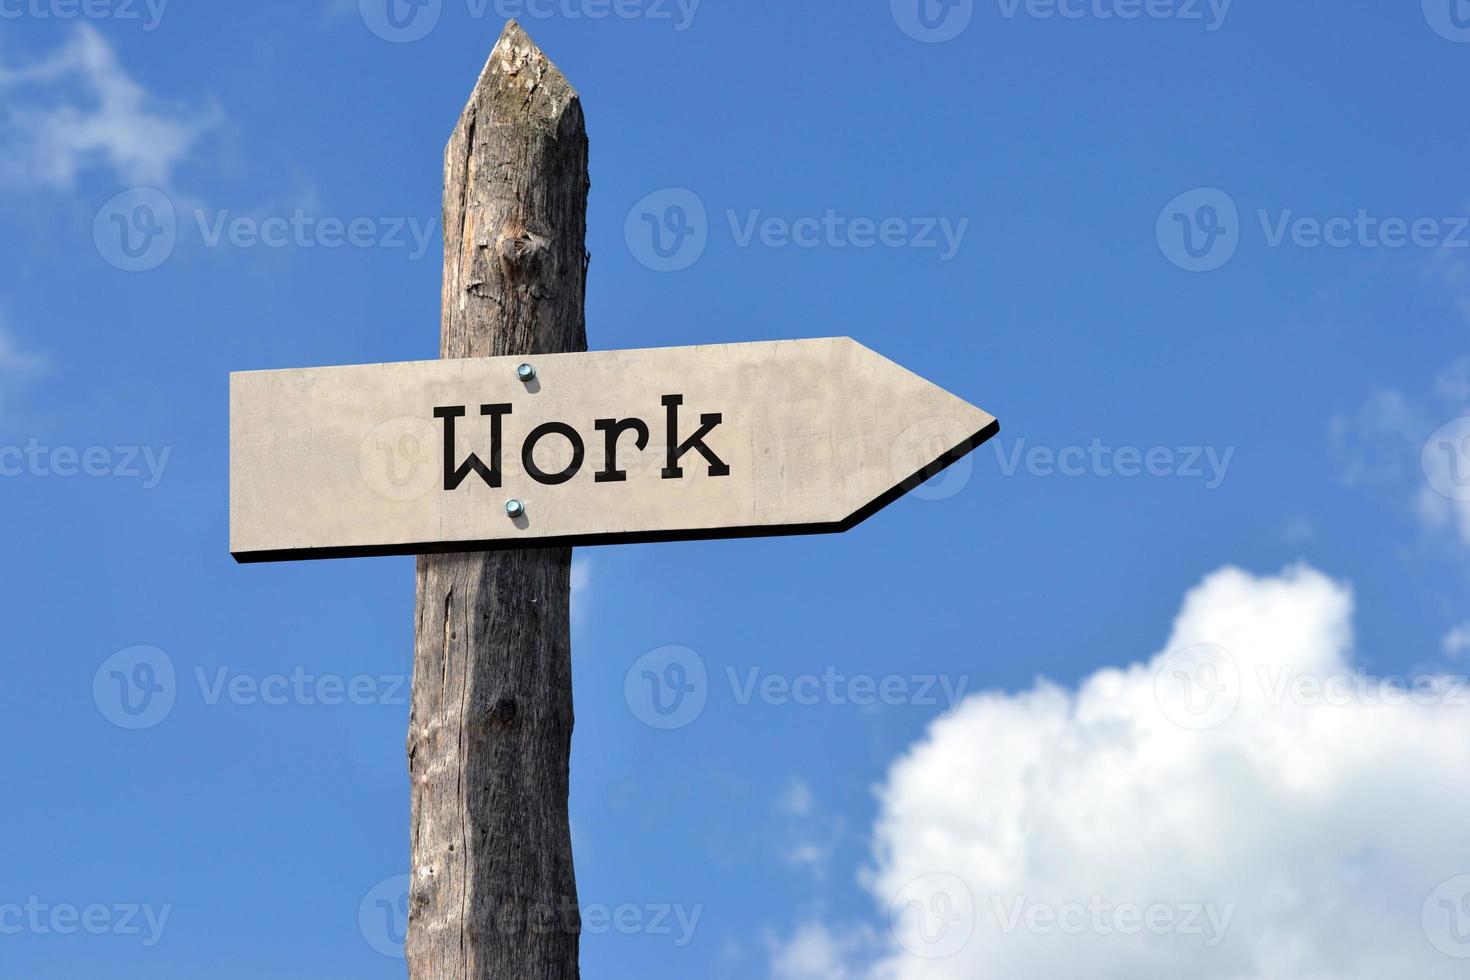 Work - Wooden Signpost with one Arrow, Sky with Clouds photo